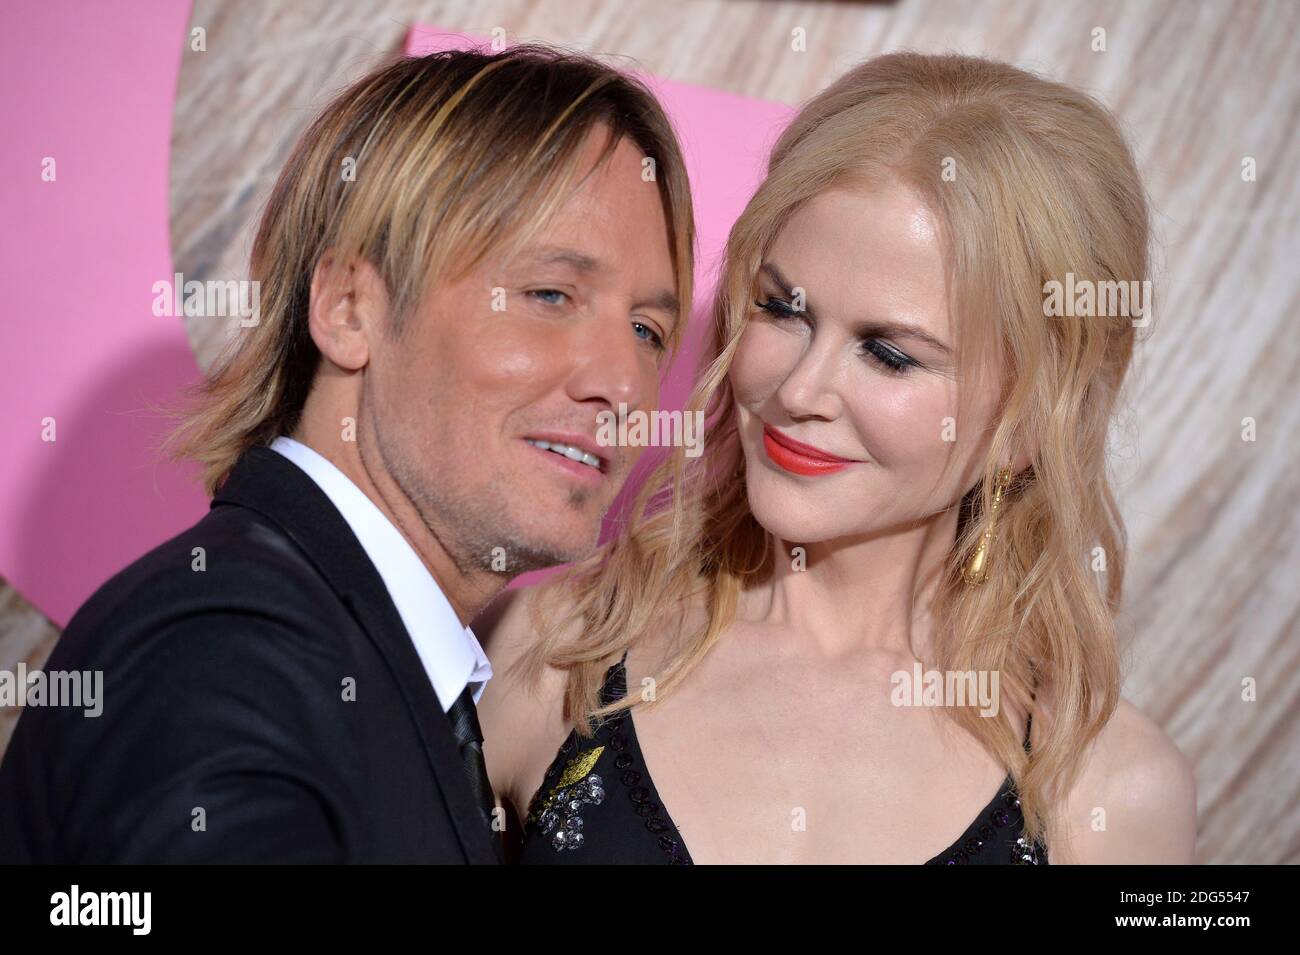 Nicole Kidman, Keith Urban attend the premiere of HBO's 'Big Little Lies' at TCL Chinese Theatre on February 7, 2017 in Los Angeles, CA, USA. Photo by Lionel Hahn/ABACAPRESS.COM Stock Photo